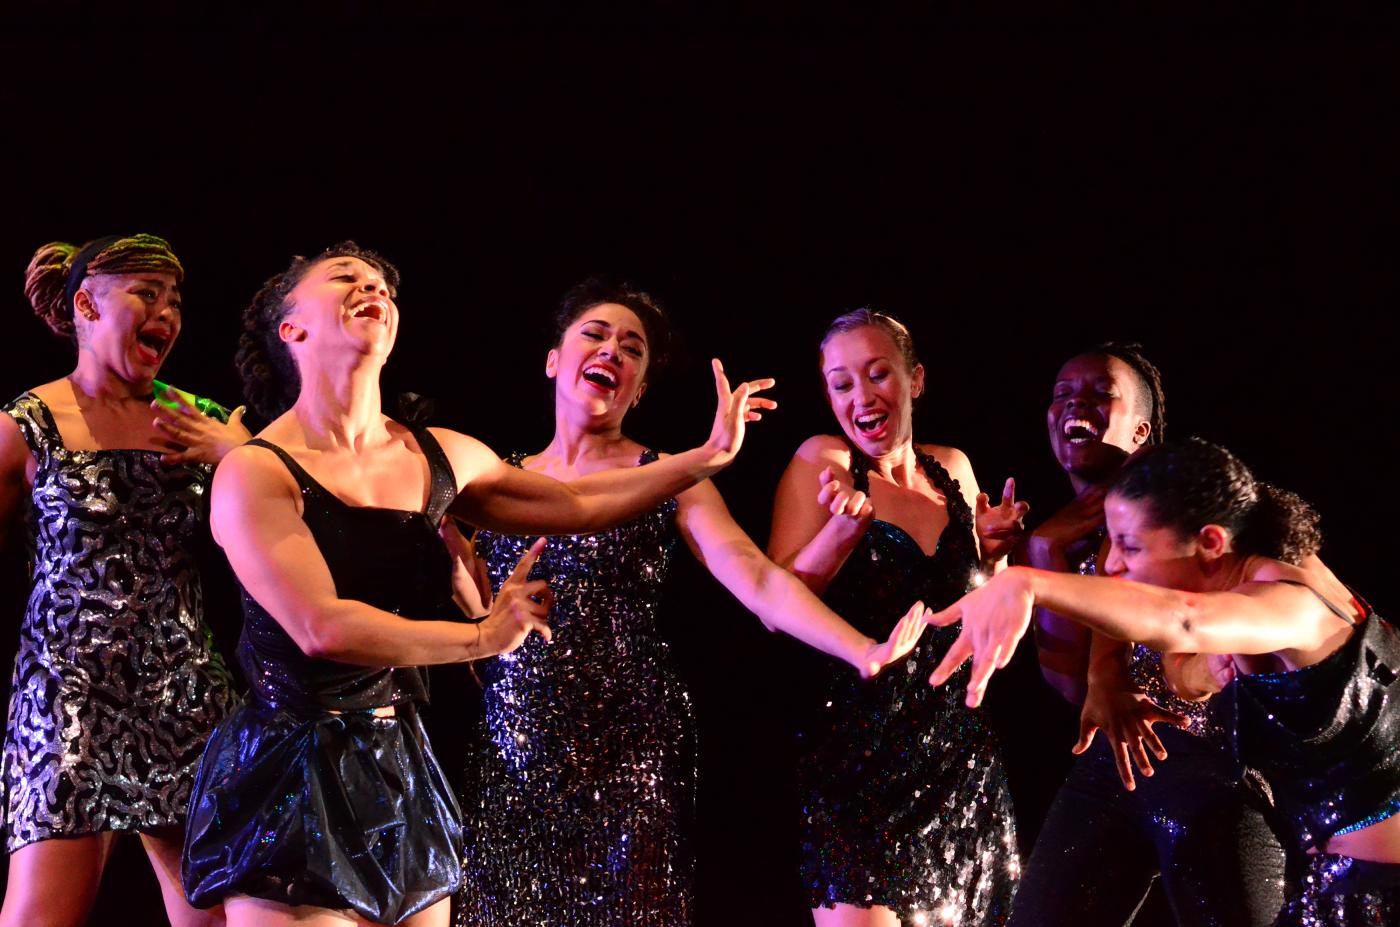 On a stage, a group of women laugh and move their arms, while wearing sequin dresses.